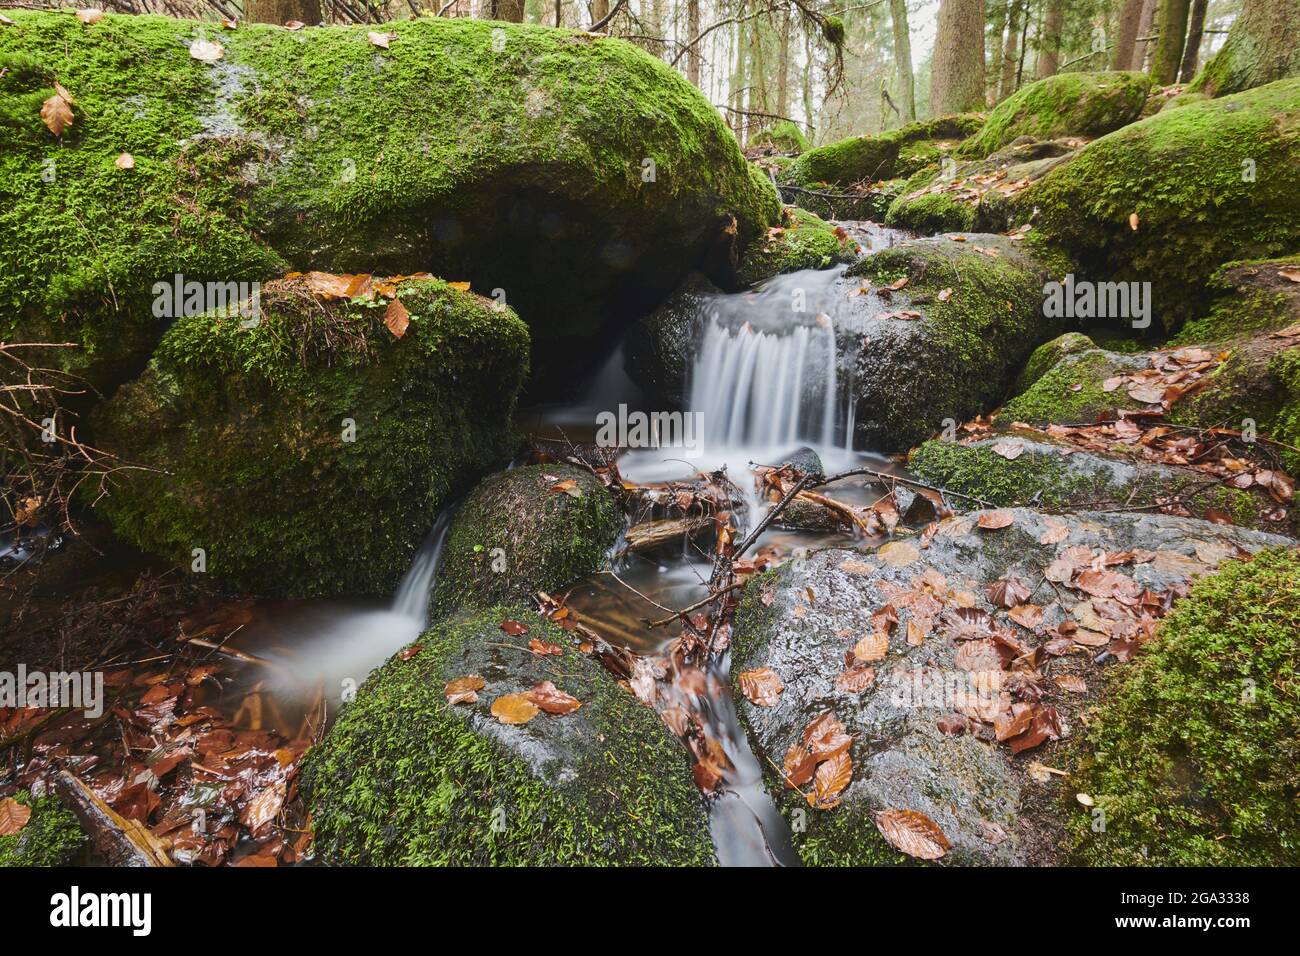 A stream flowing through the forest at Hollental Nature Reserve, Bavarian Forest; Bavaria, Germany Stock Photo